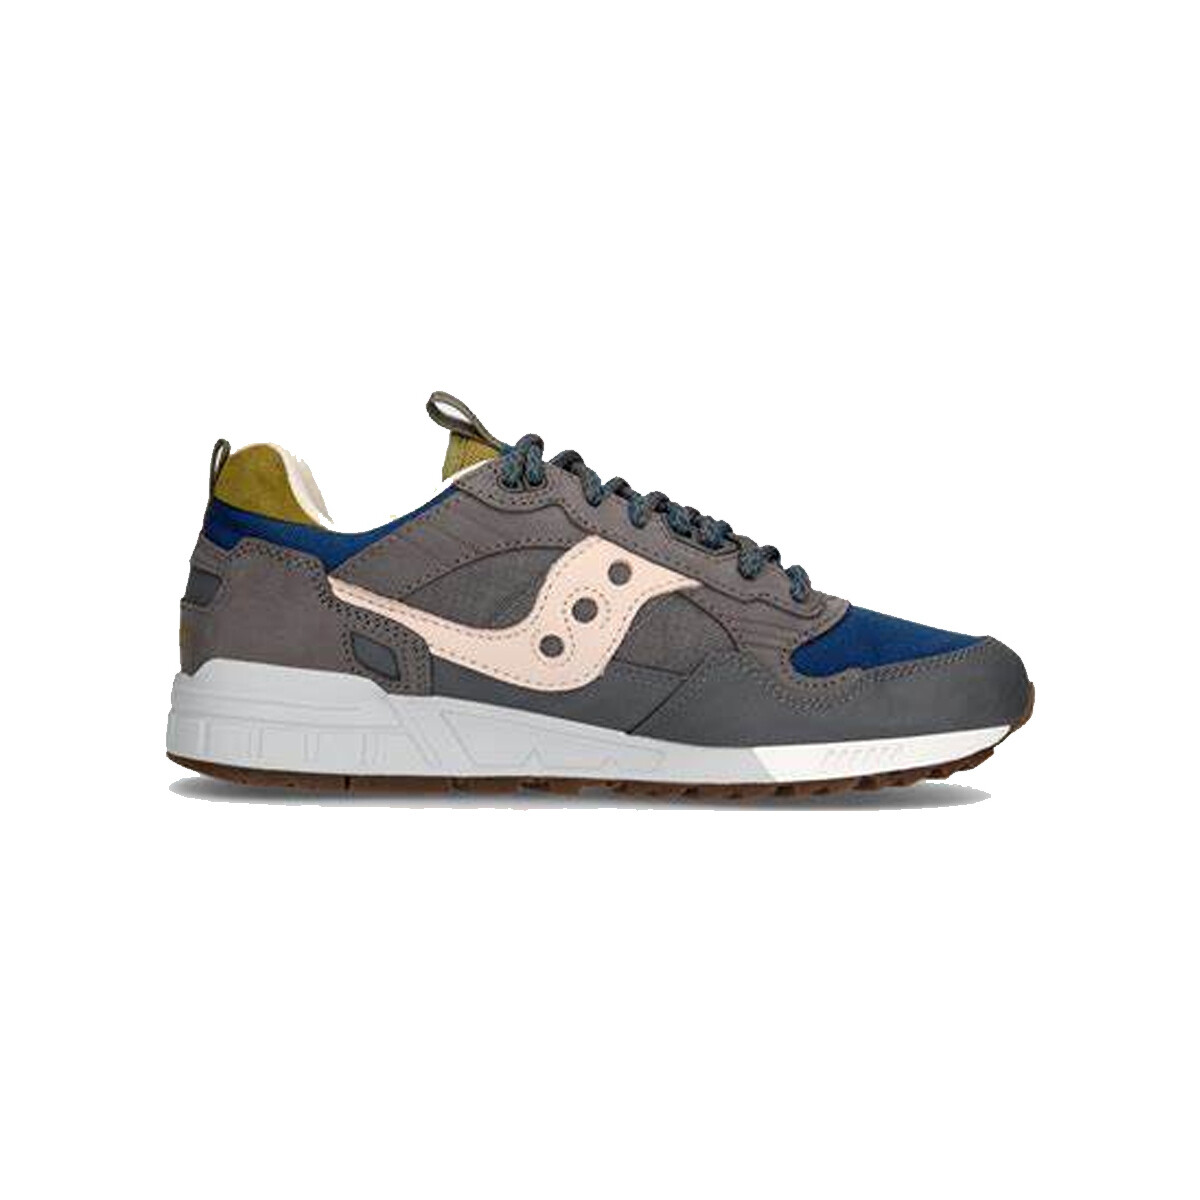 Chaussures Homme feature x saucony trainers courageous bacon eggs s70716-3 Multicolore